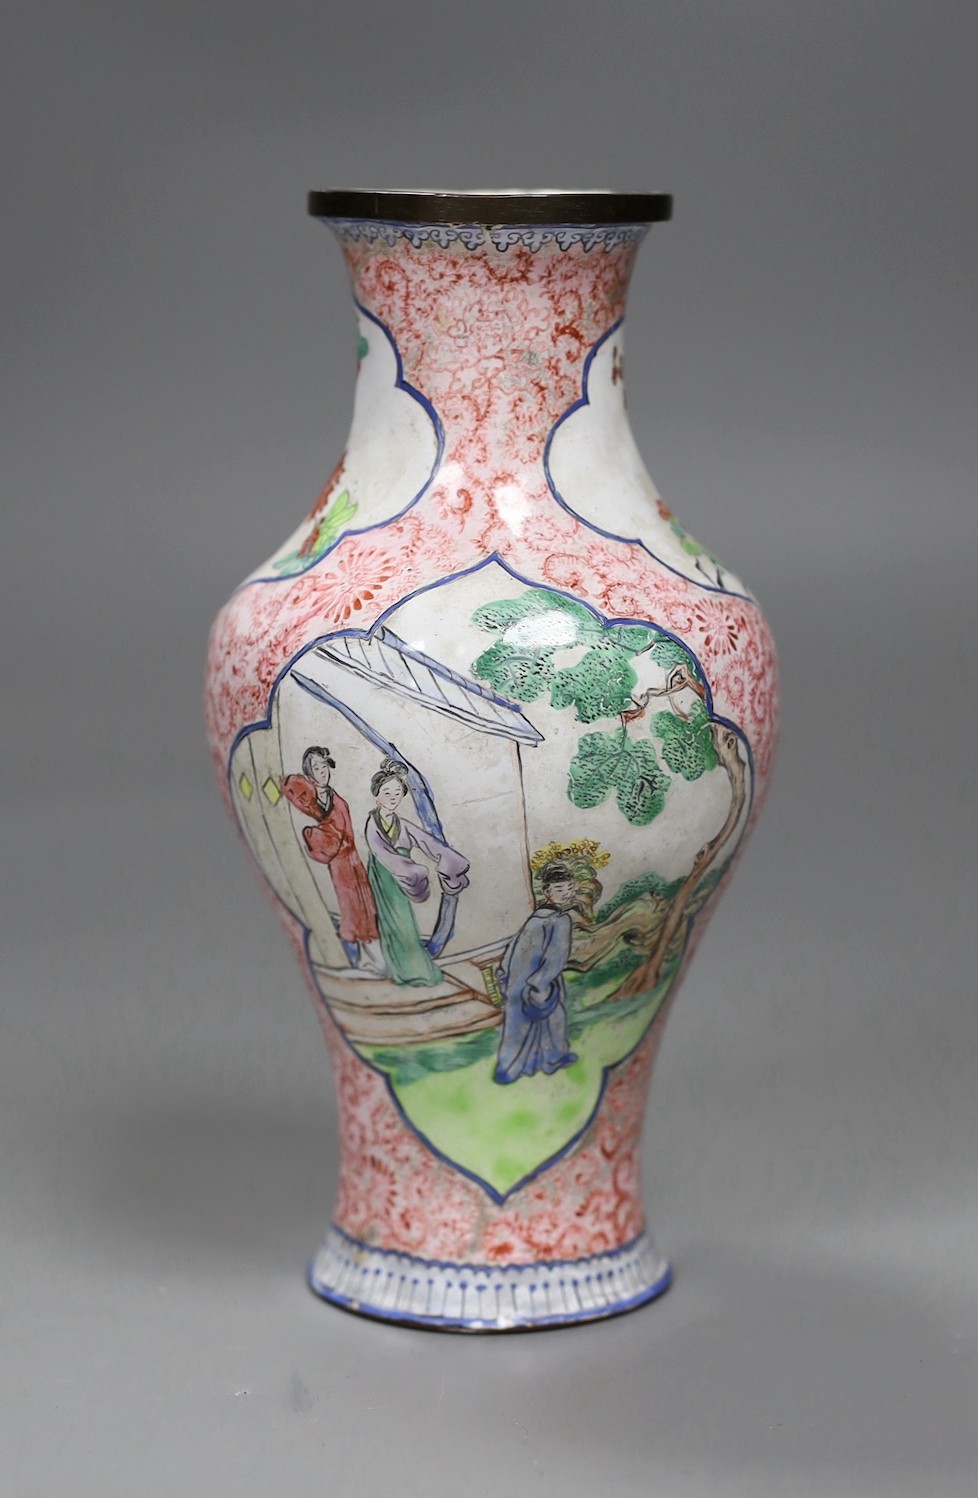 A Chinese Canton enamel vase, Qianlong mark, late 18th / 19th century, 16.5cm tall